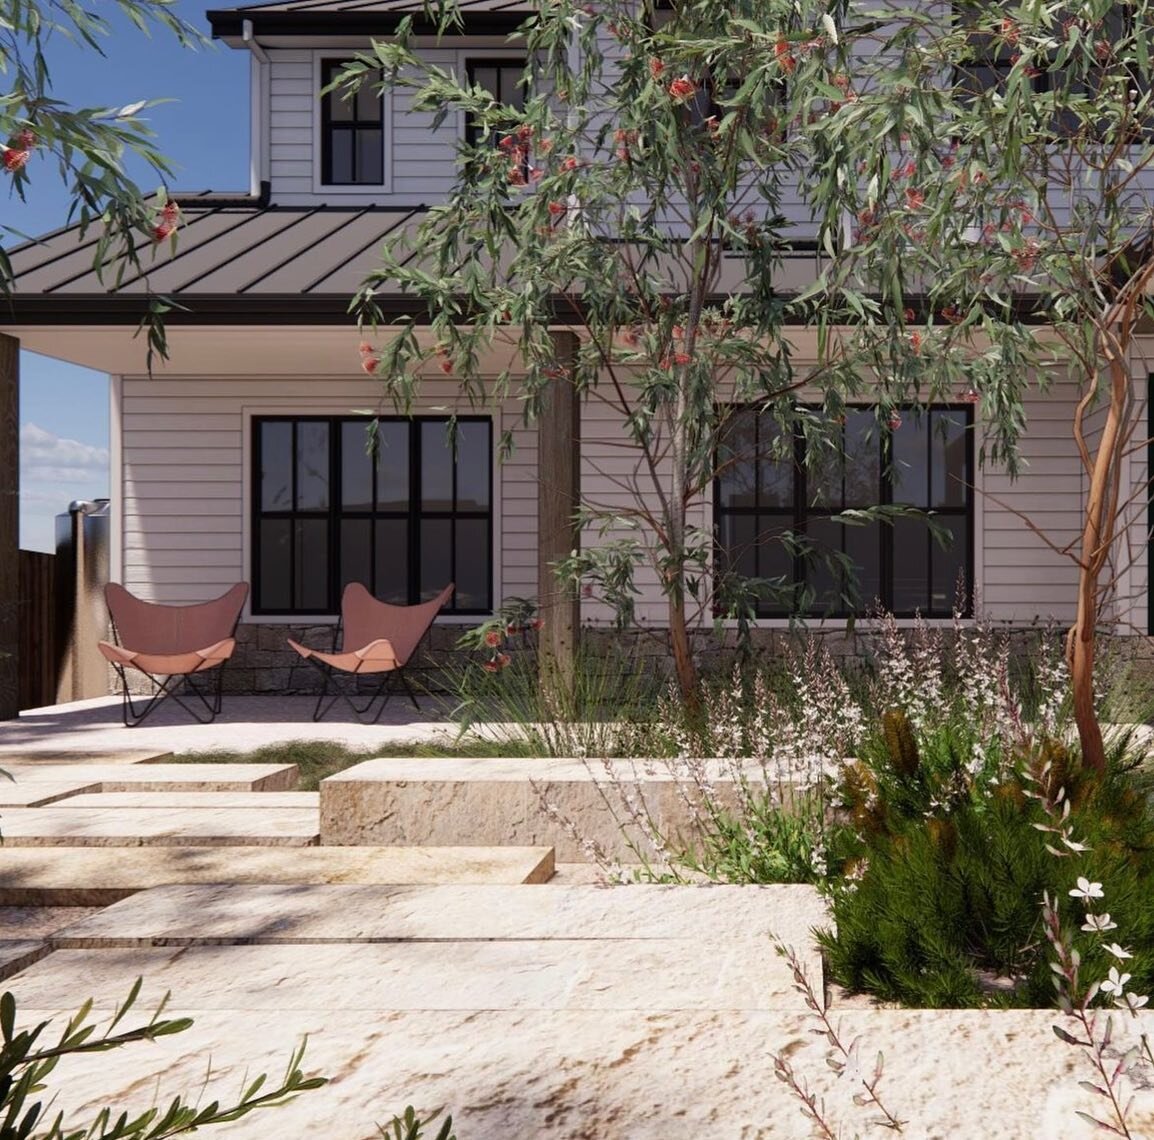 Front Garden concept at our custom 515m2 Spilt Level 2 Storey Home coming soon to Mulgoa&hellip; Watch this space for 2024 😍 🏡 🌳 ☀️ 
Landscaping @ paul.alexander.landscape 

▪️6Bedrooms &amp; 5Bathrooms
▪️Open Plan Family / Dining / Kitchen 
▪️Den